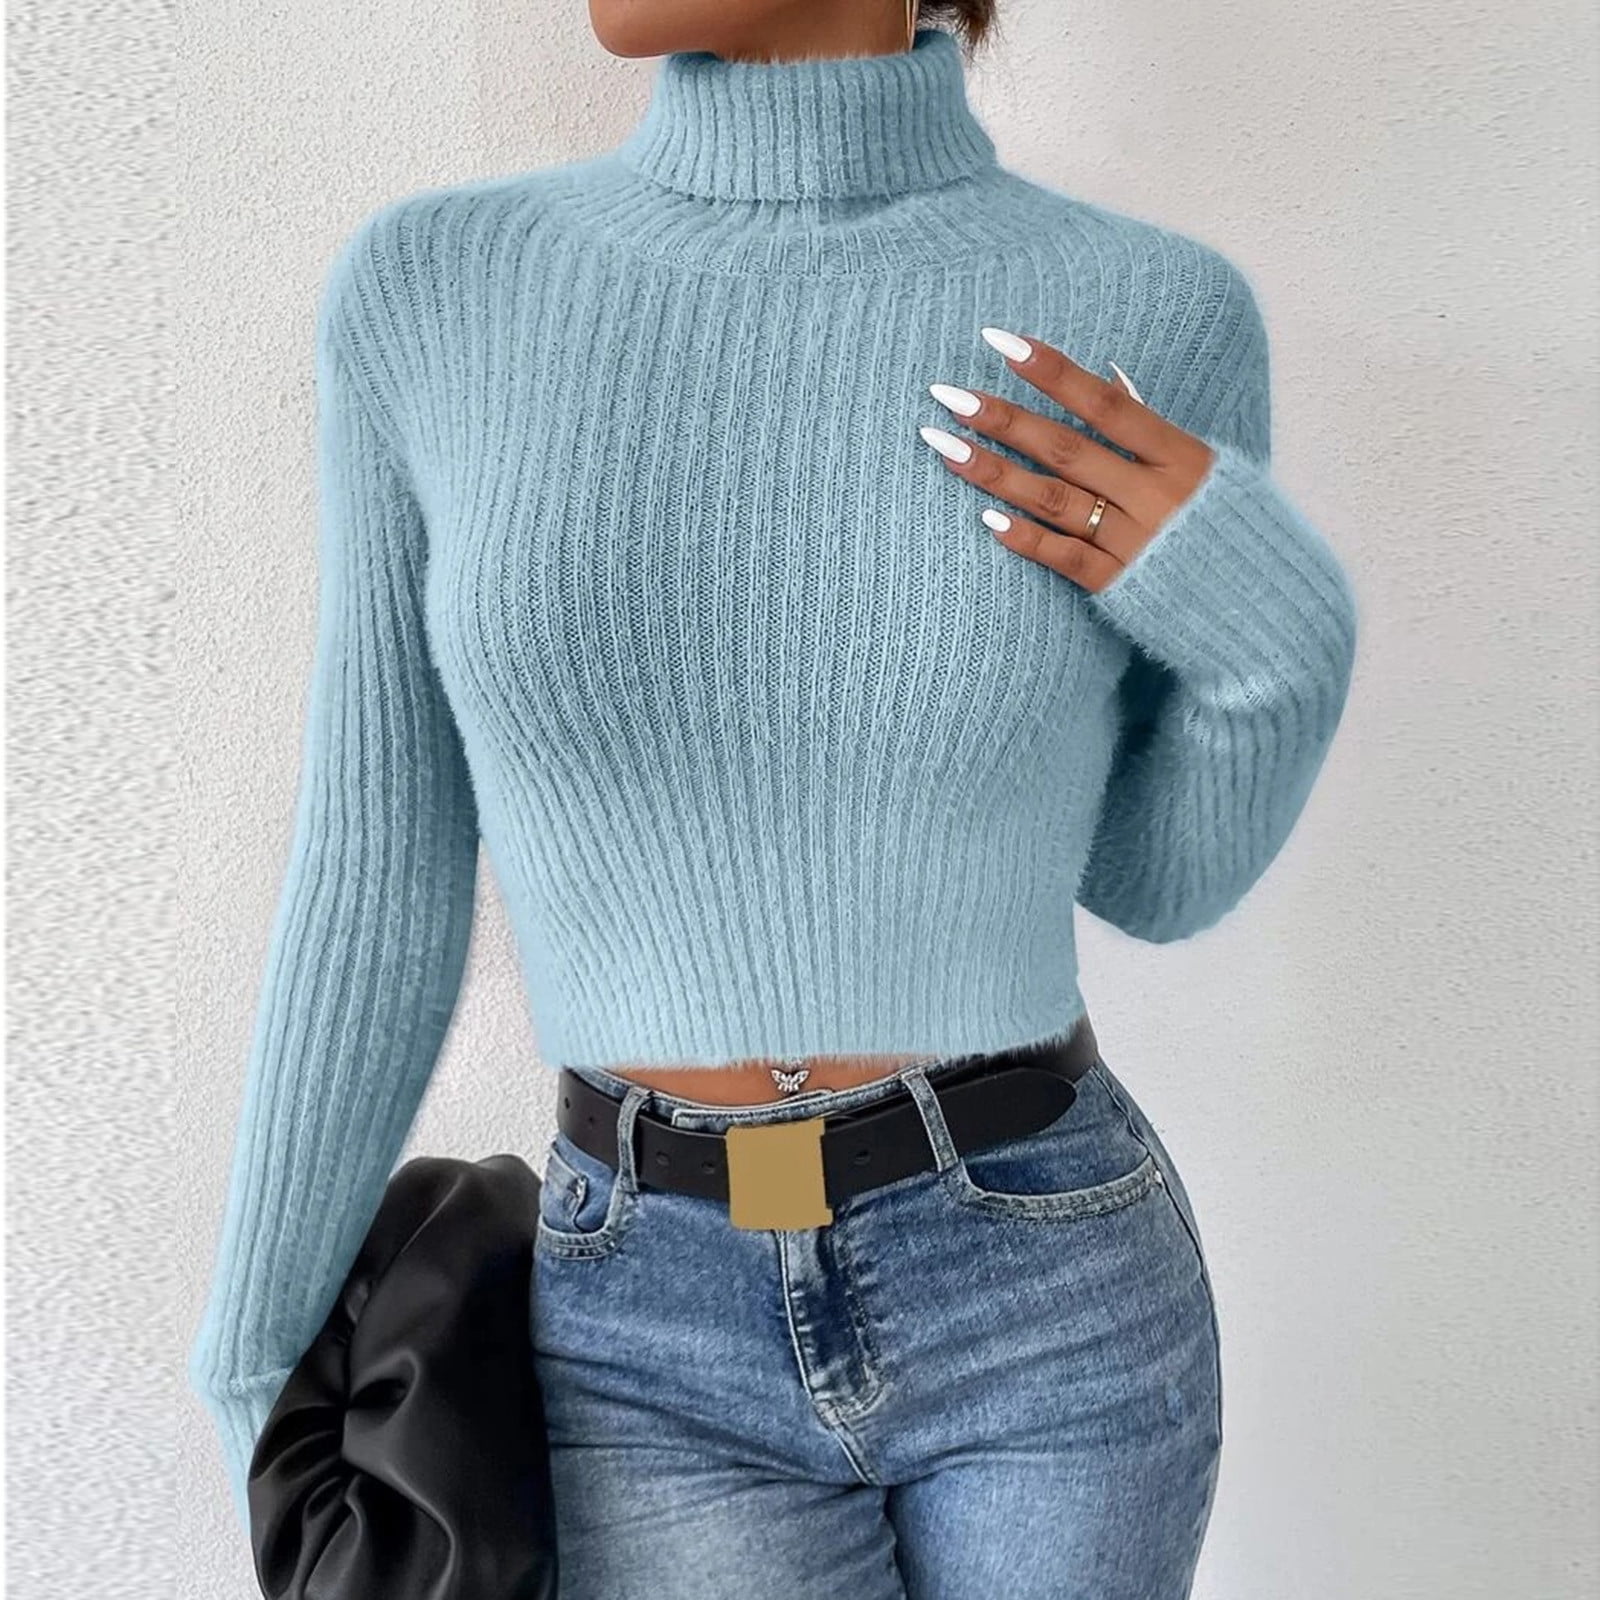 Women's Sweater Striped Sweaters Long Sleeve Crew Neck Color Block ...